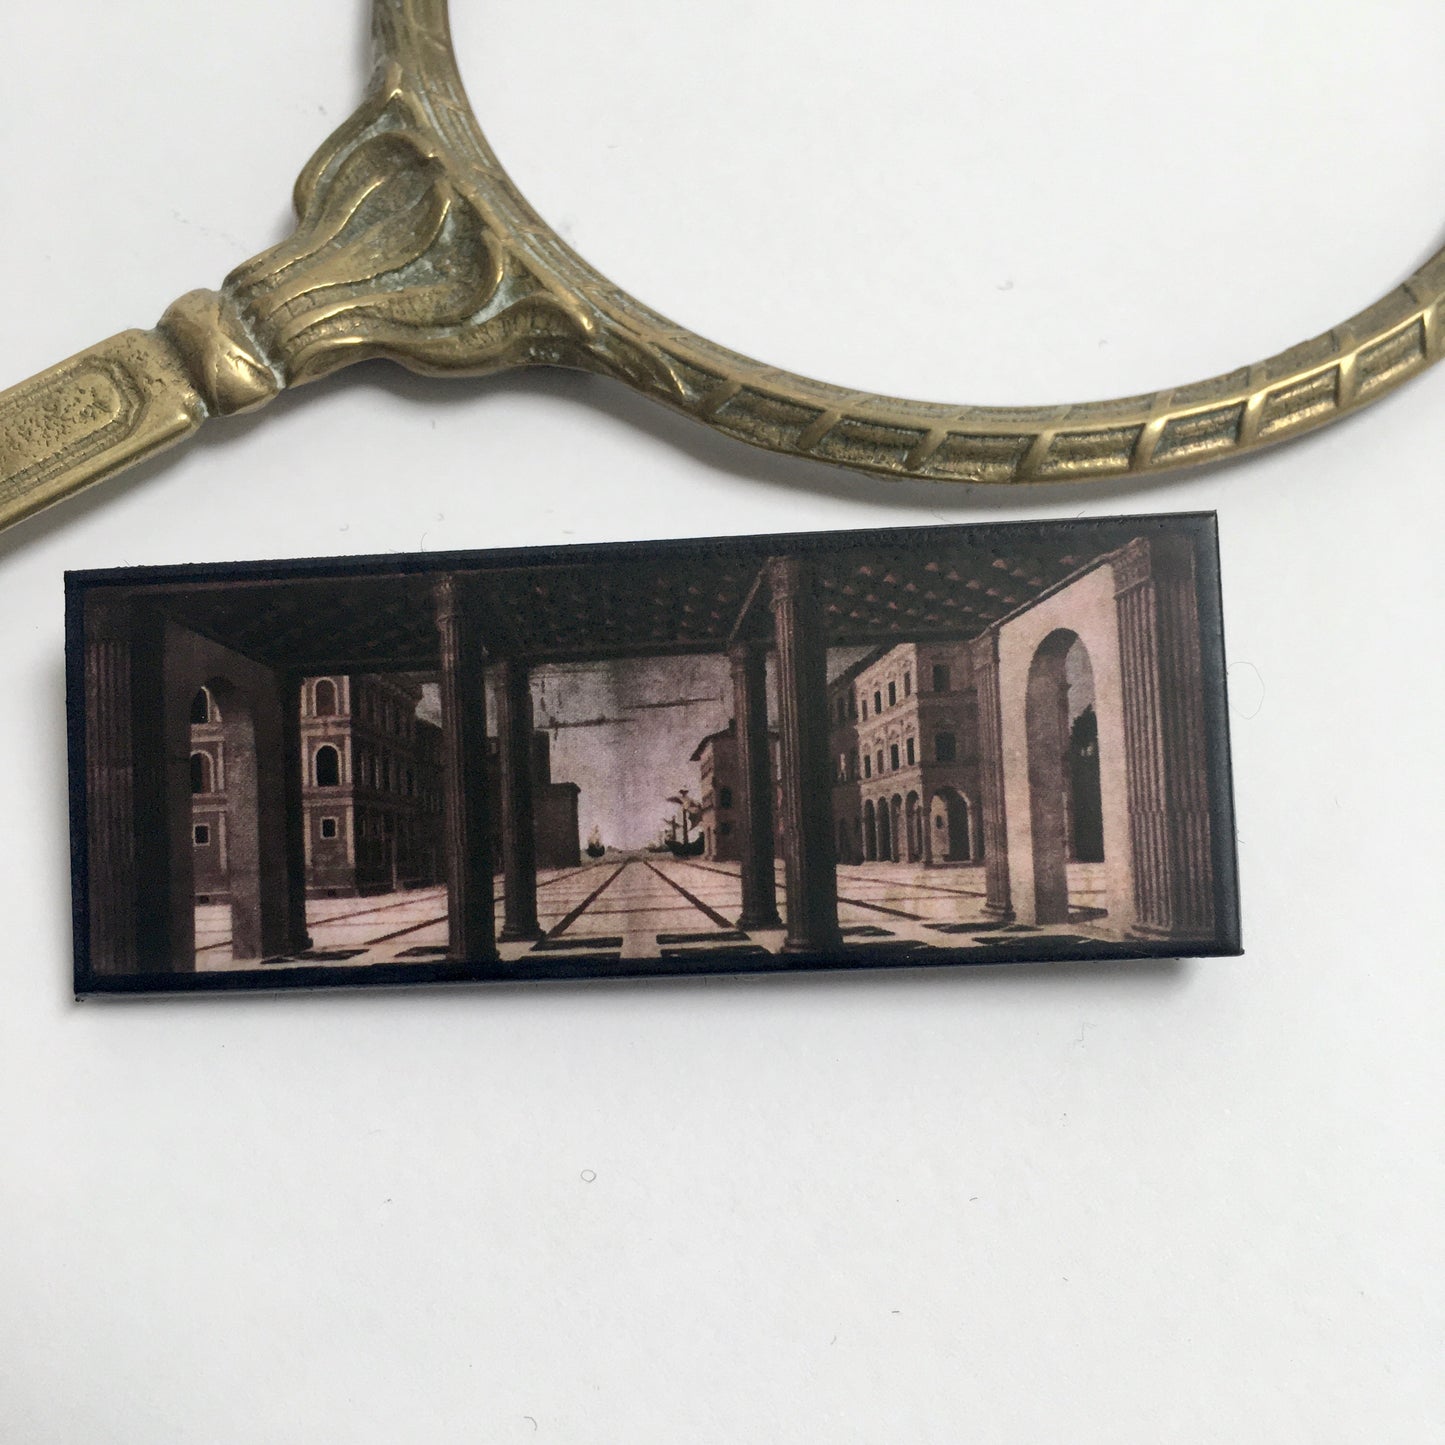 The Ideal City, Berlin Renaissance art brooch on sustainable wood. Aesthetic jewellery inspired by the Italian architectonical art. Artsy gift for men and woman.